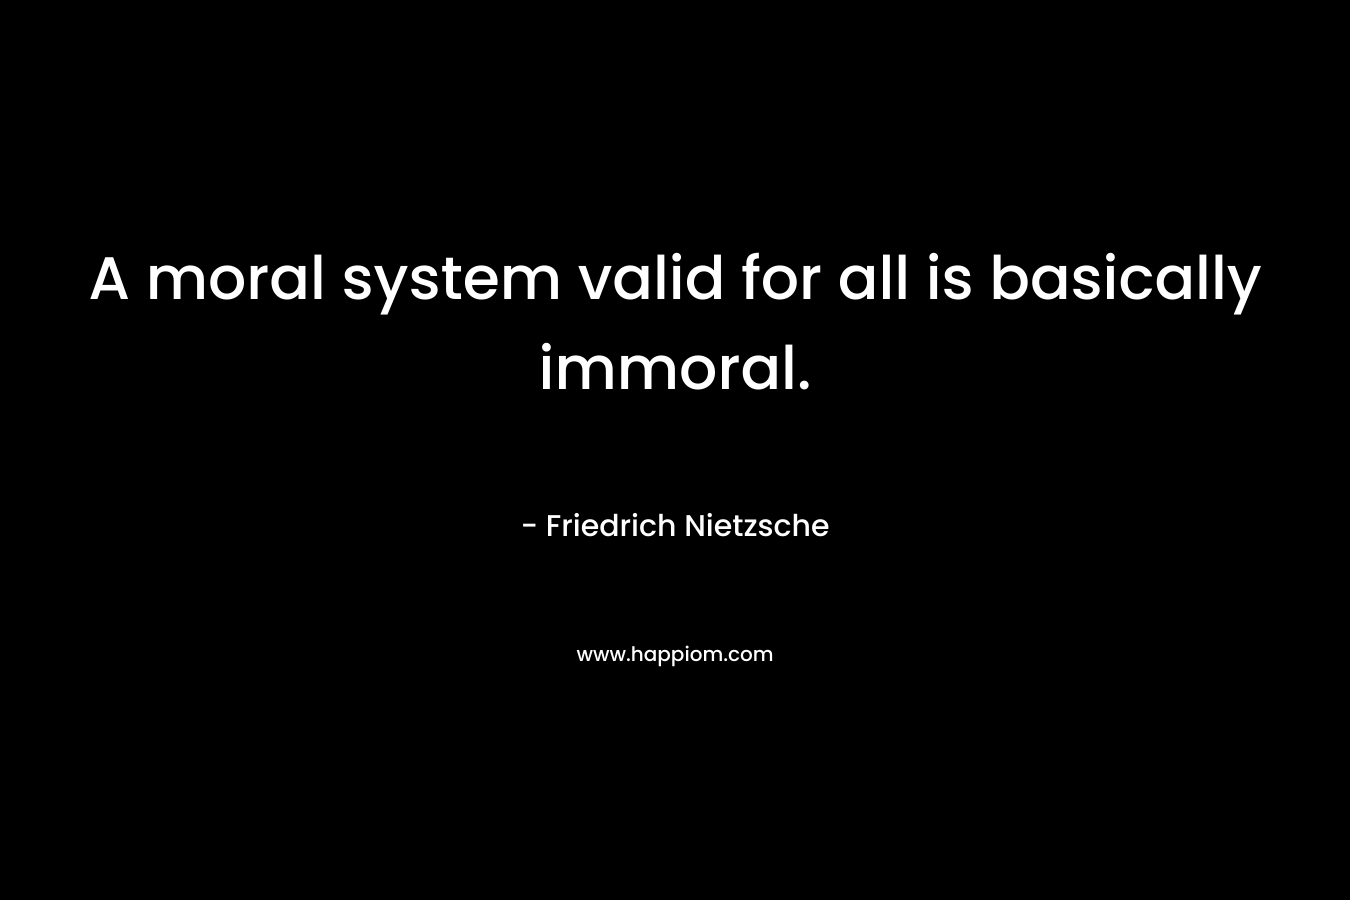 A moral system valid for all is basically immoral.